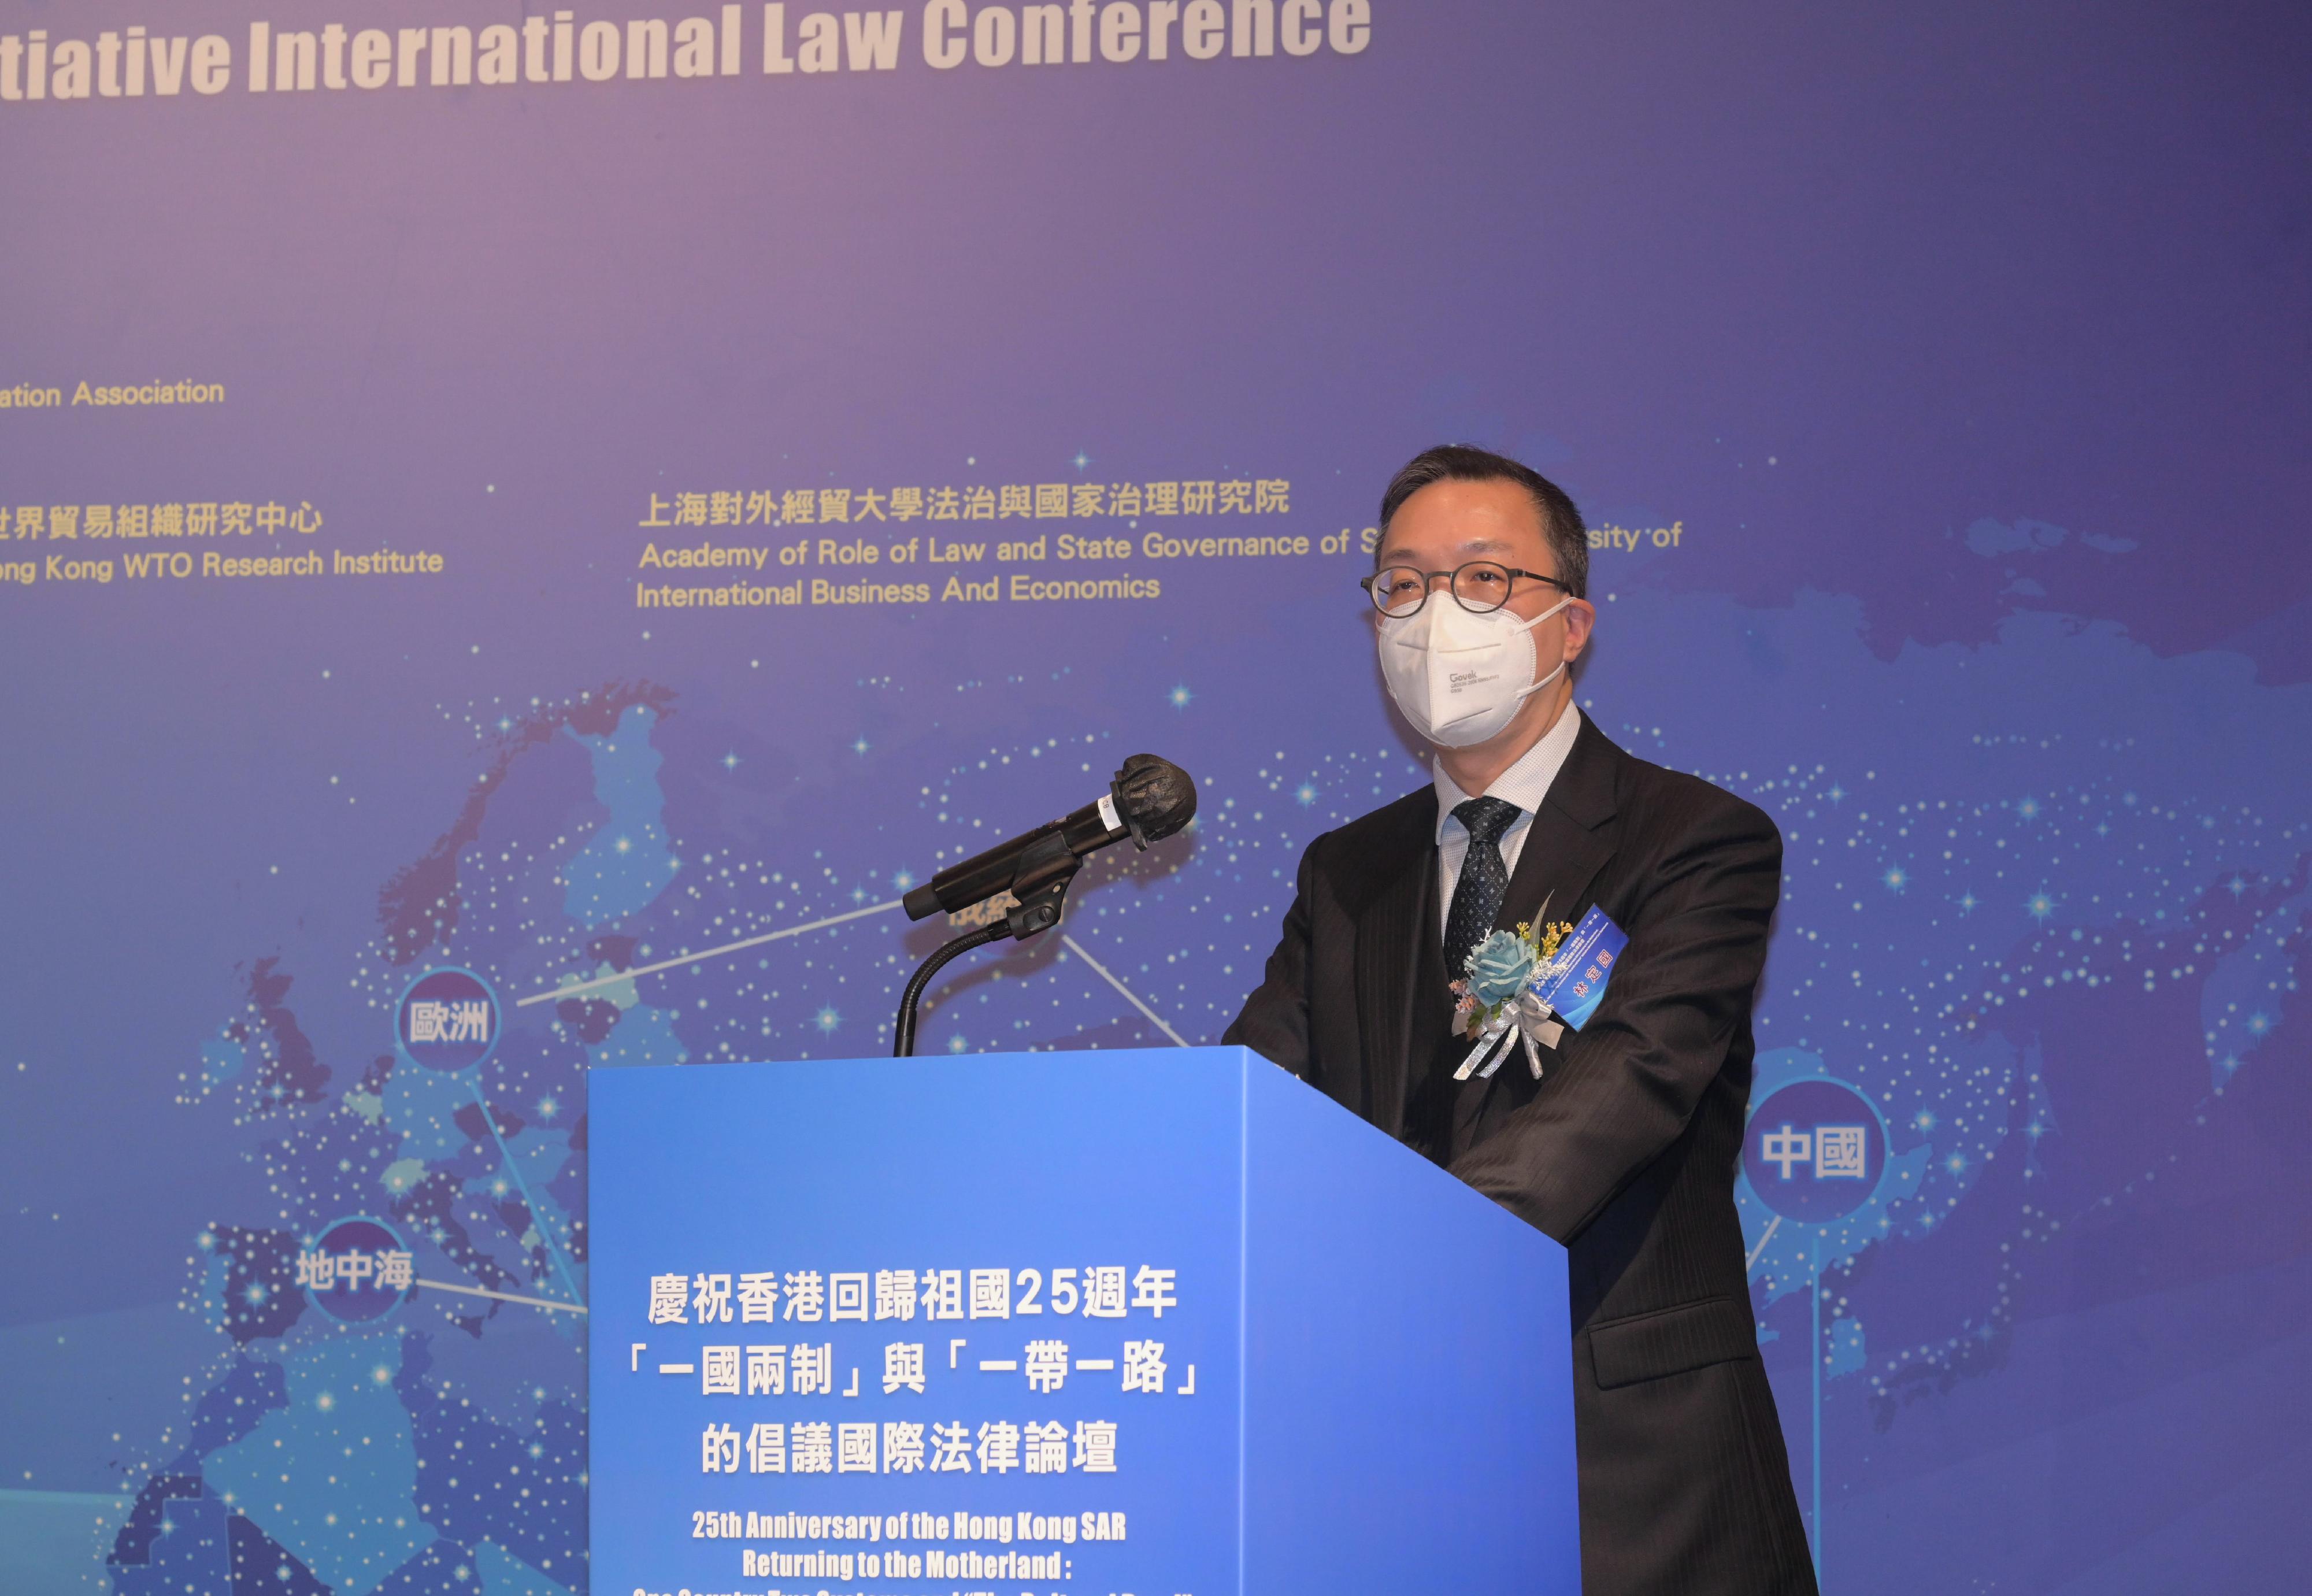 The Secretary for Justice, Mr Paul Lam, SC, speaks at an international law conference on "one country, two systems" and the Belt and Road Initiative organised by the Hong Kong Basic Law Education Association today (December 3).